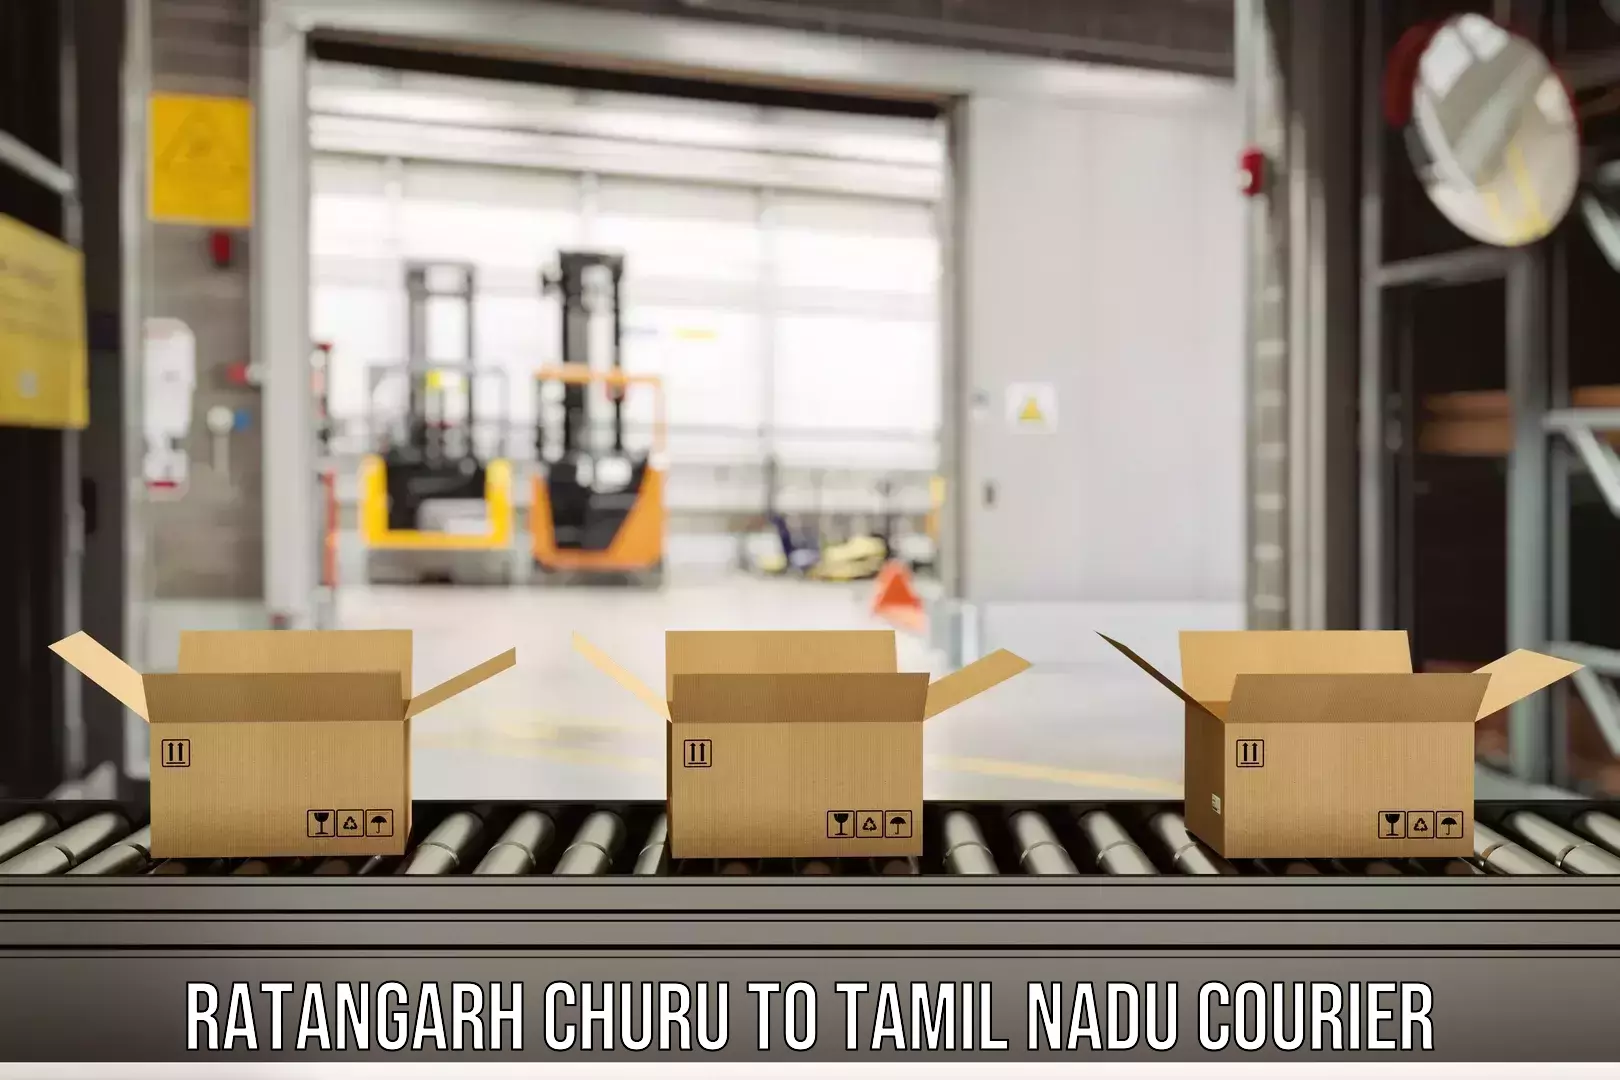 Holiday shipping services Ratangarh Churu to Sri Ramachandra Institute of Higher Education and Research Chennai